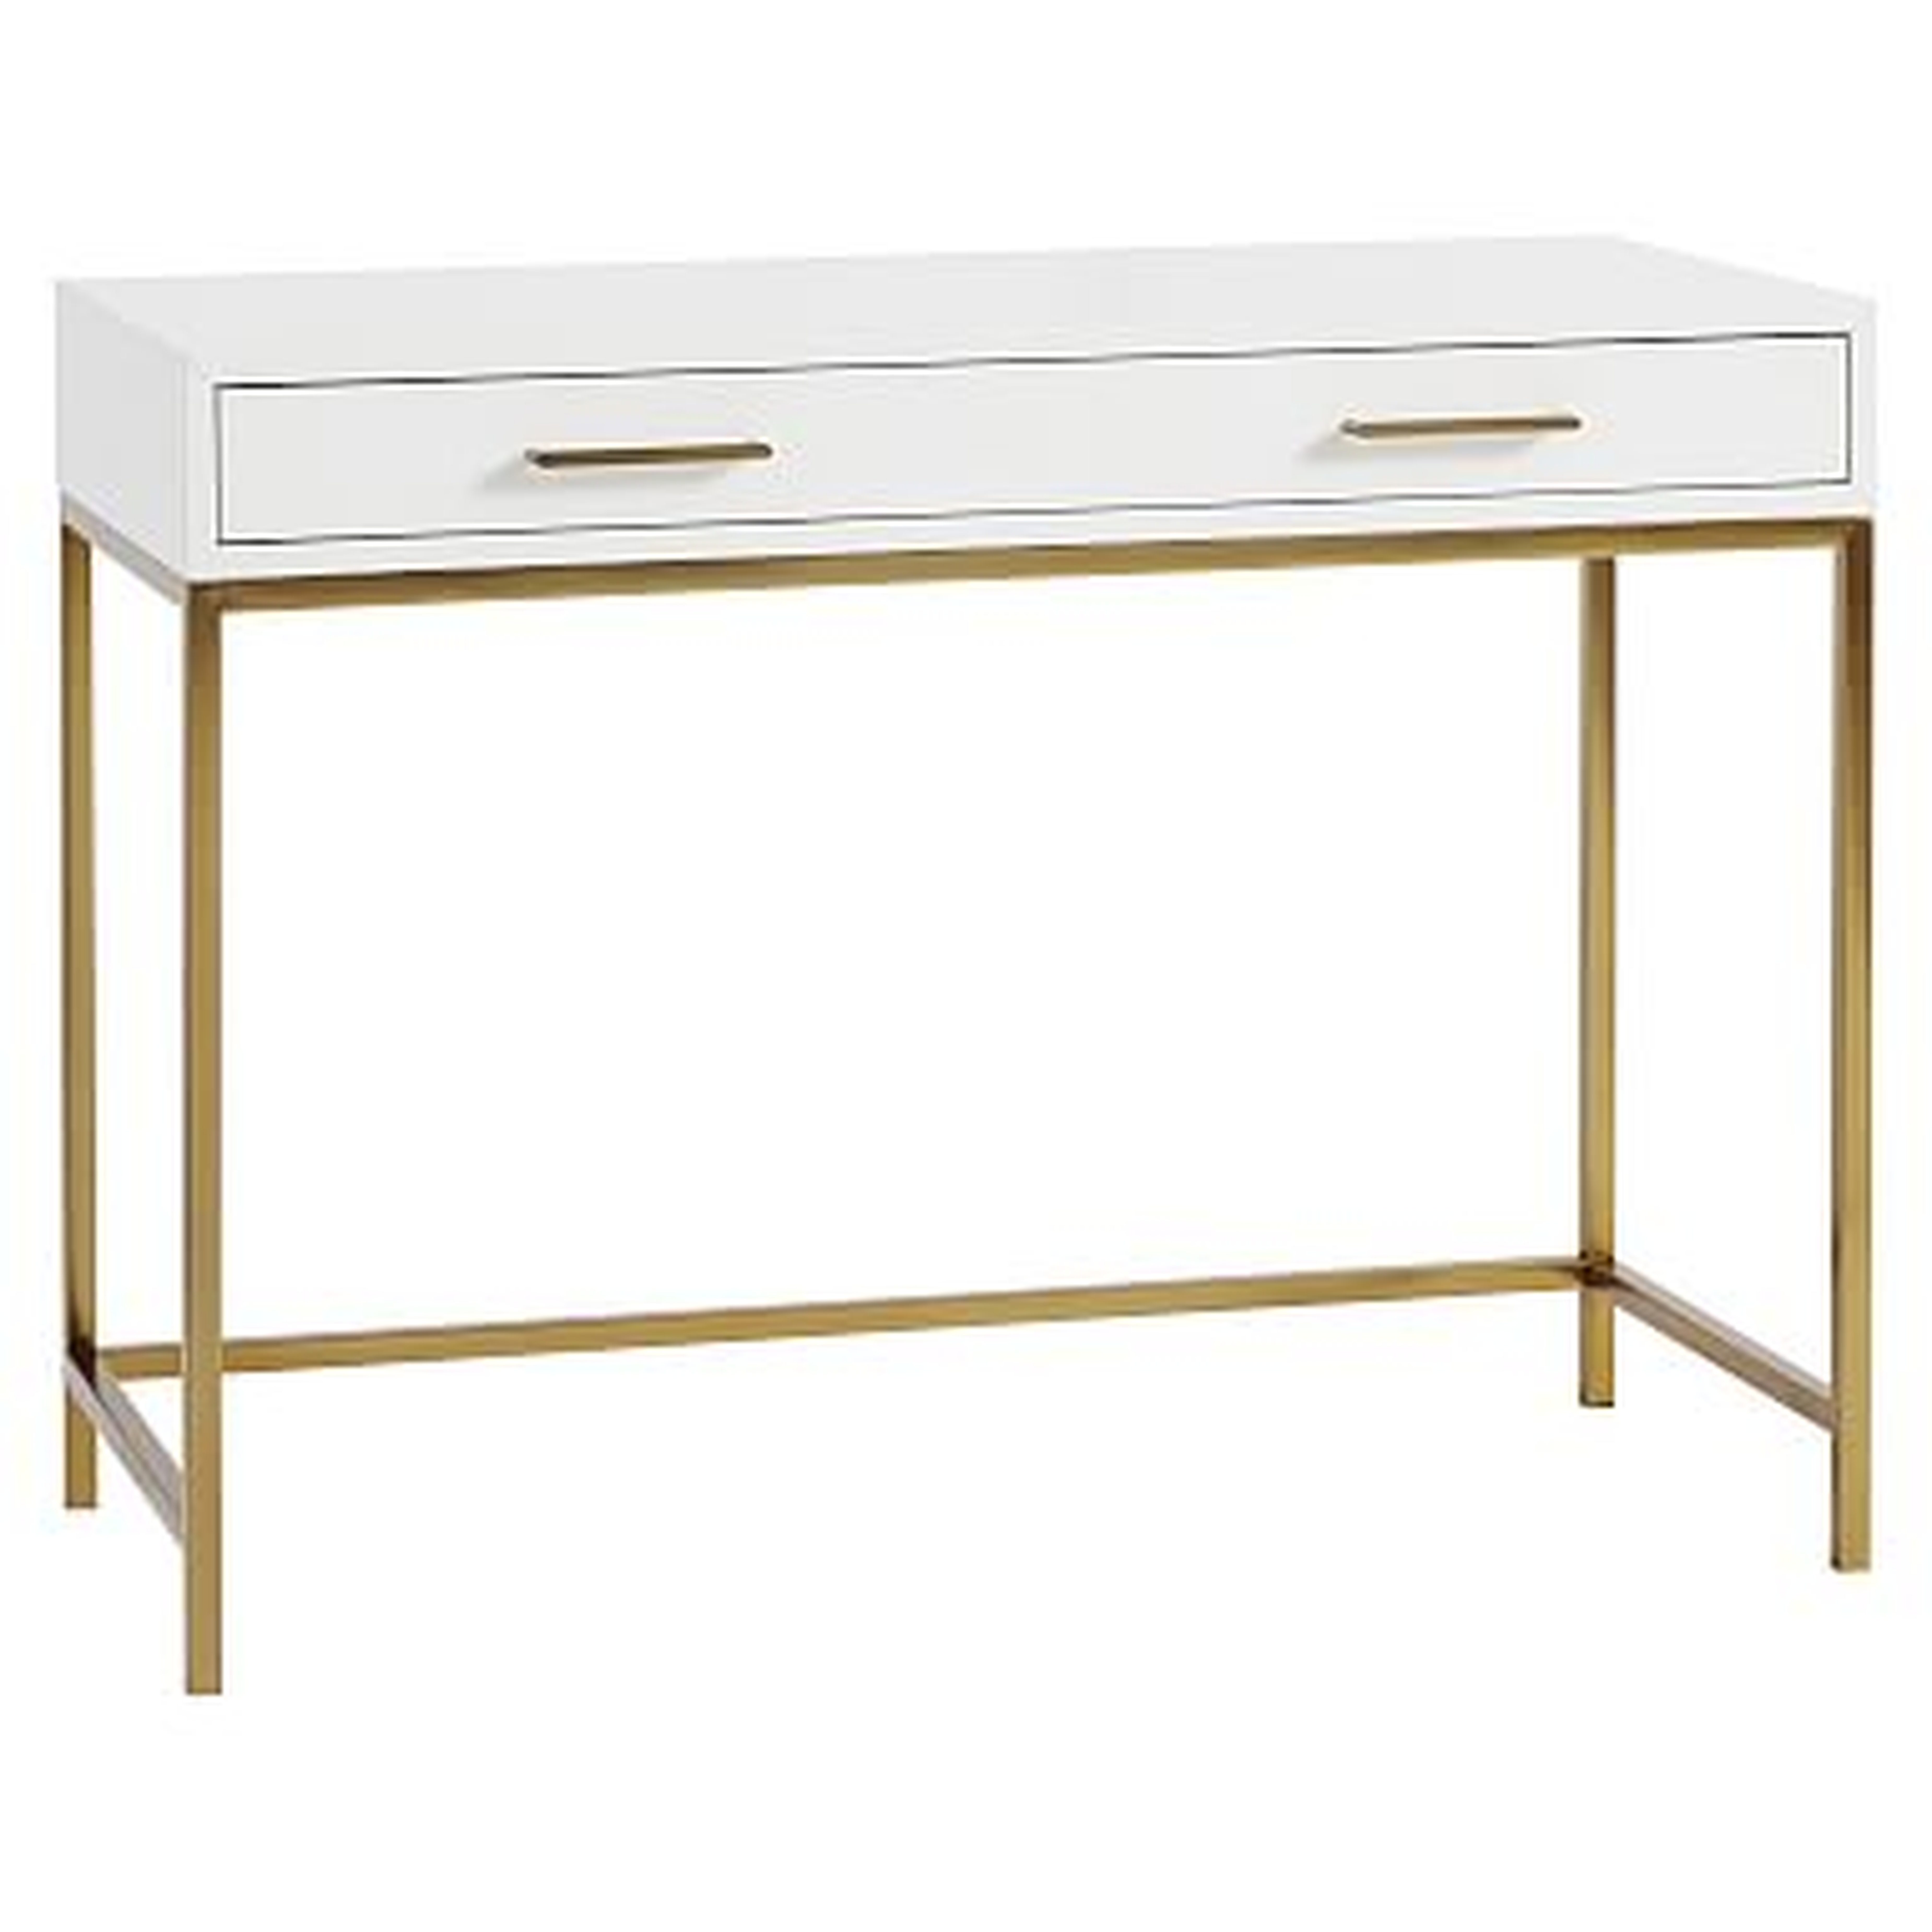 Blaire Classic Desk, Lacquered Simply White - Pottery Barn Teen